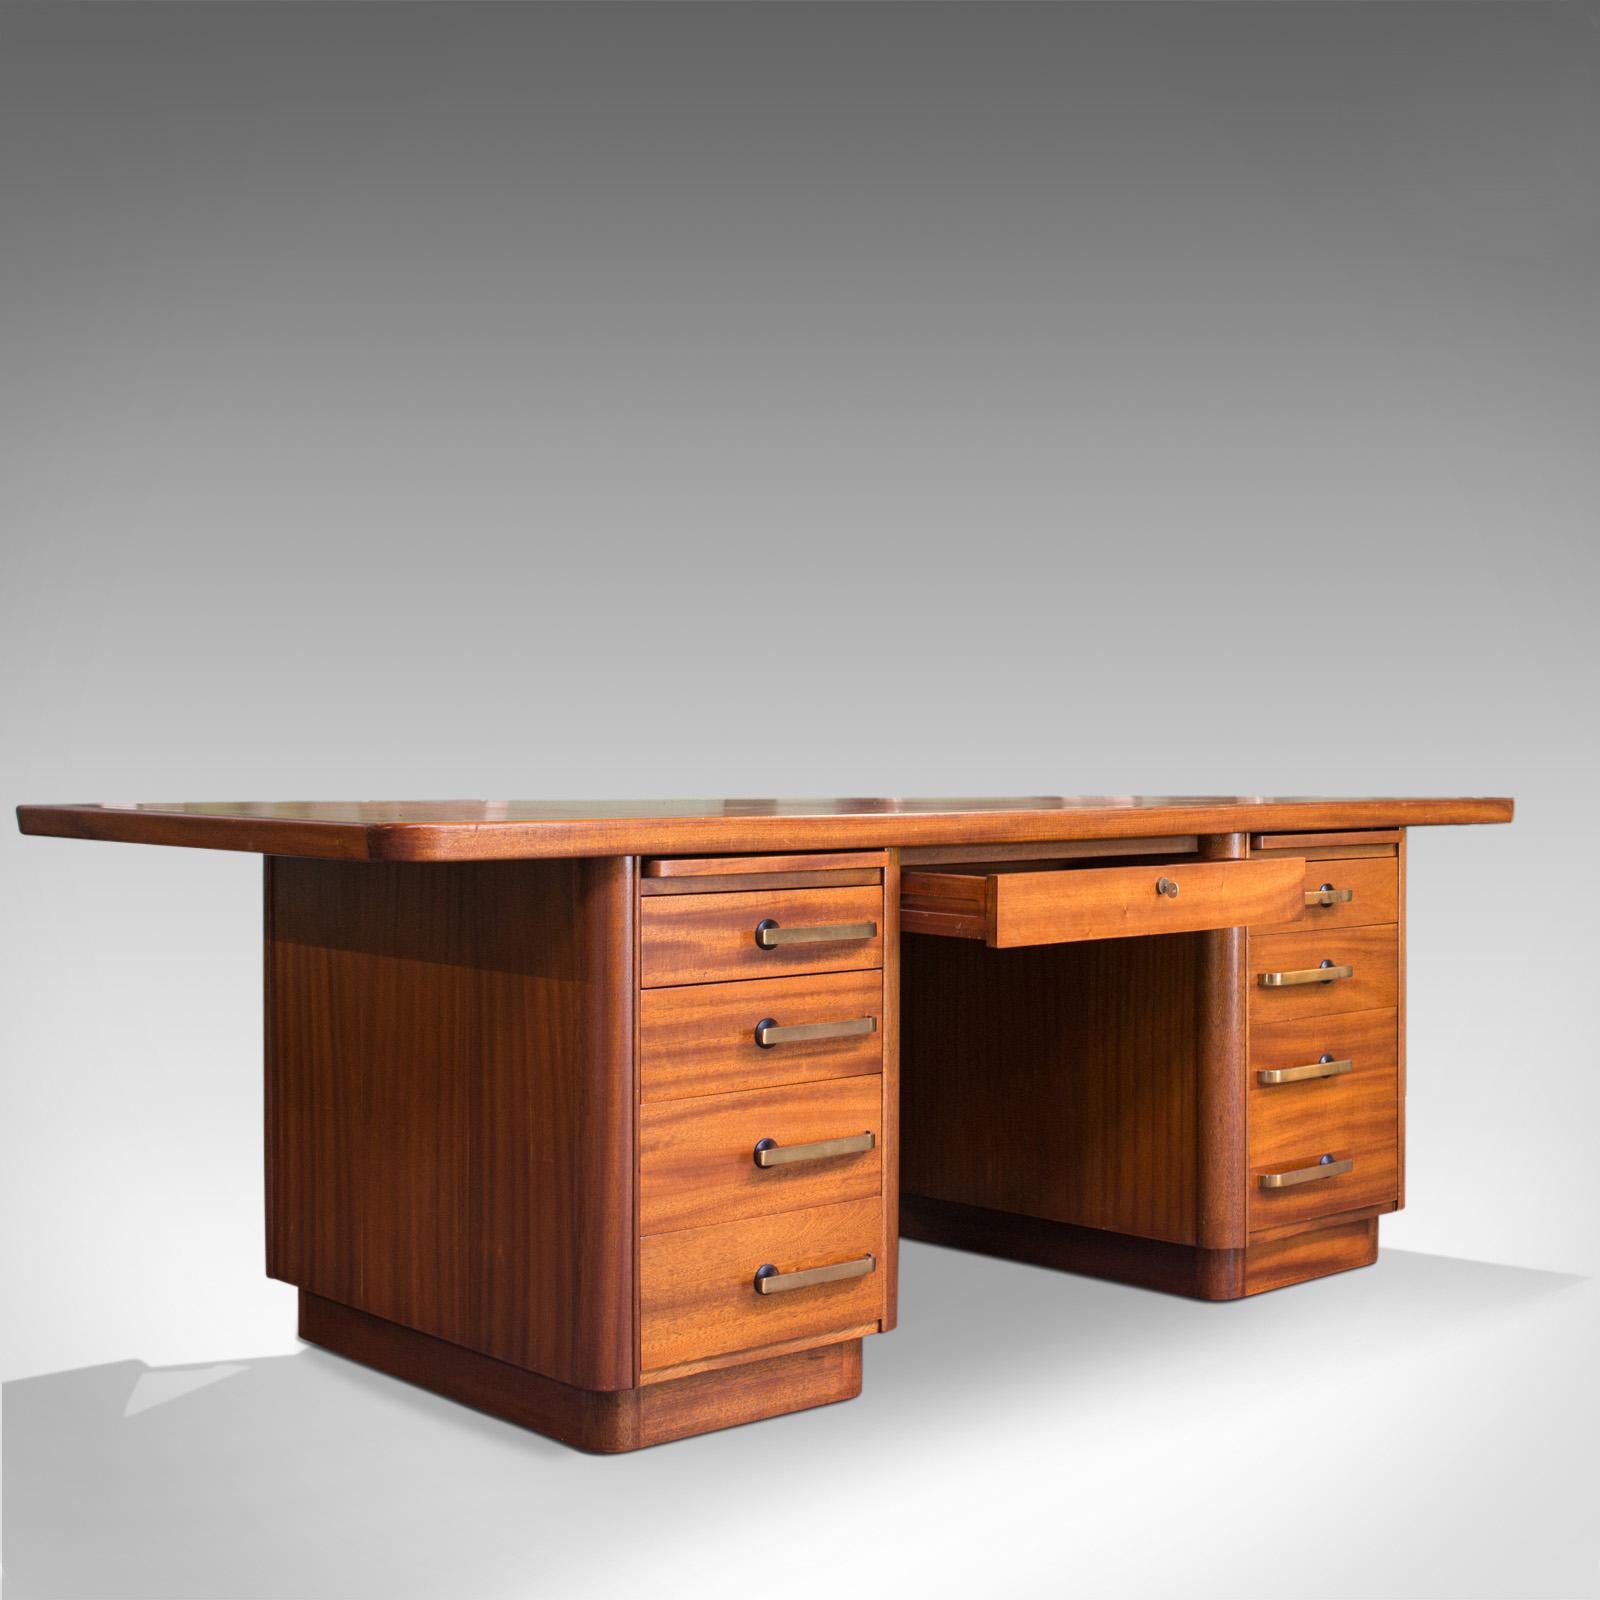 This is a large vintage pedestal desk. An English, teak and leather office desk by the sought after cabinet maker, Abbess, with strong Art Deco overtones and dating to the mid-20th century, circa 1950.

Attractive teak desk with good consistent